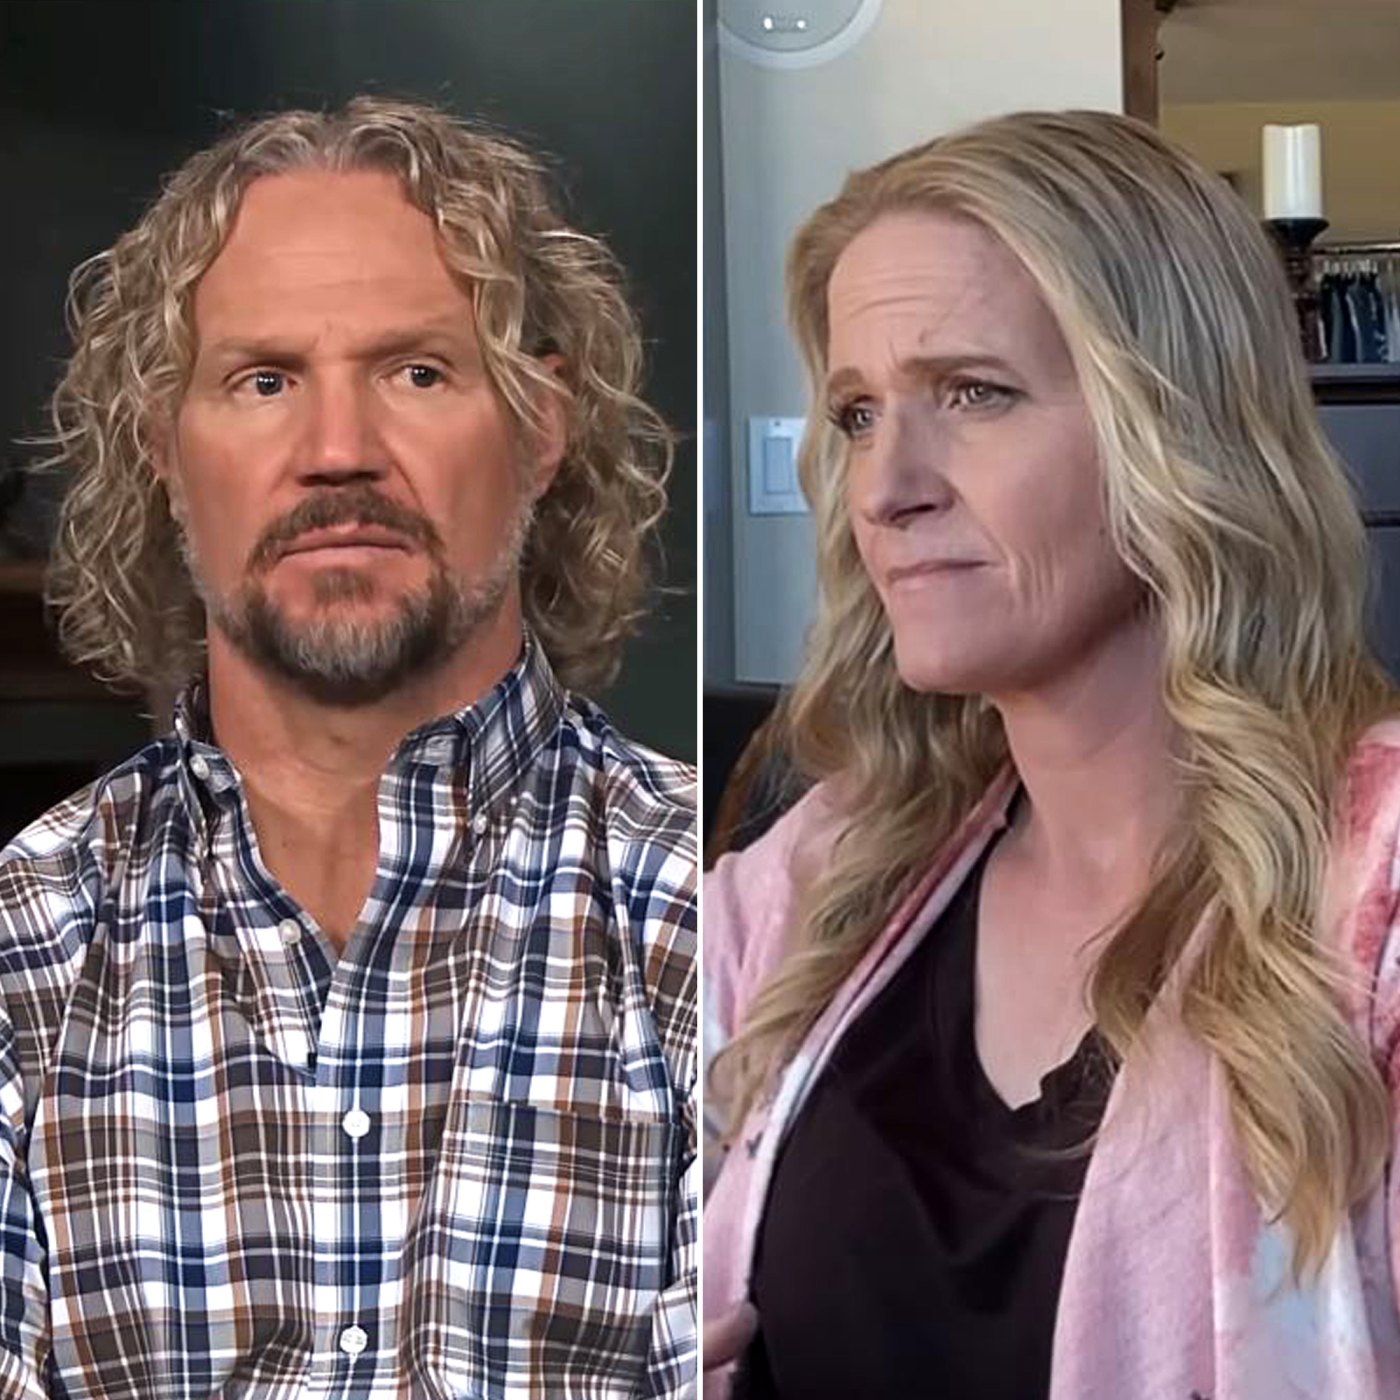 Sister Wives’ Kody Brown Calls for 'Patriarchy’ After Christine Split